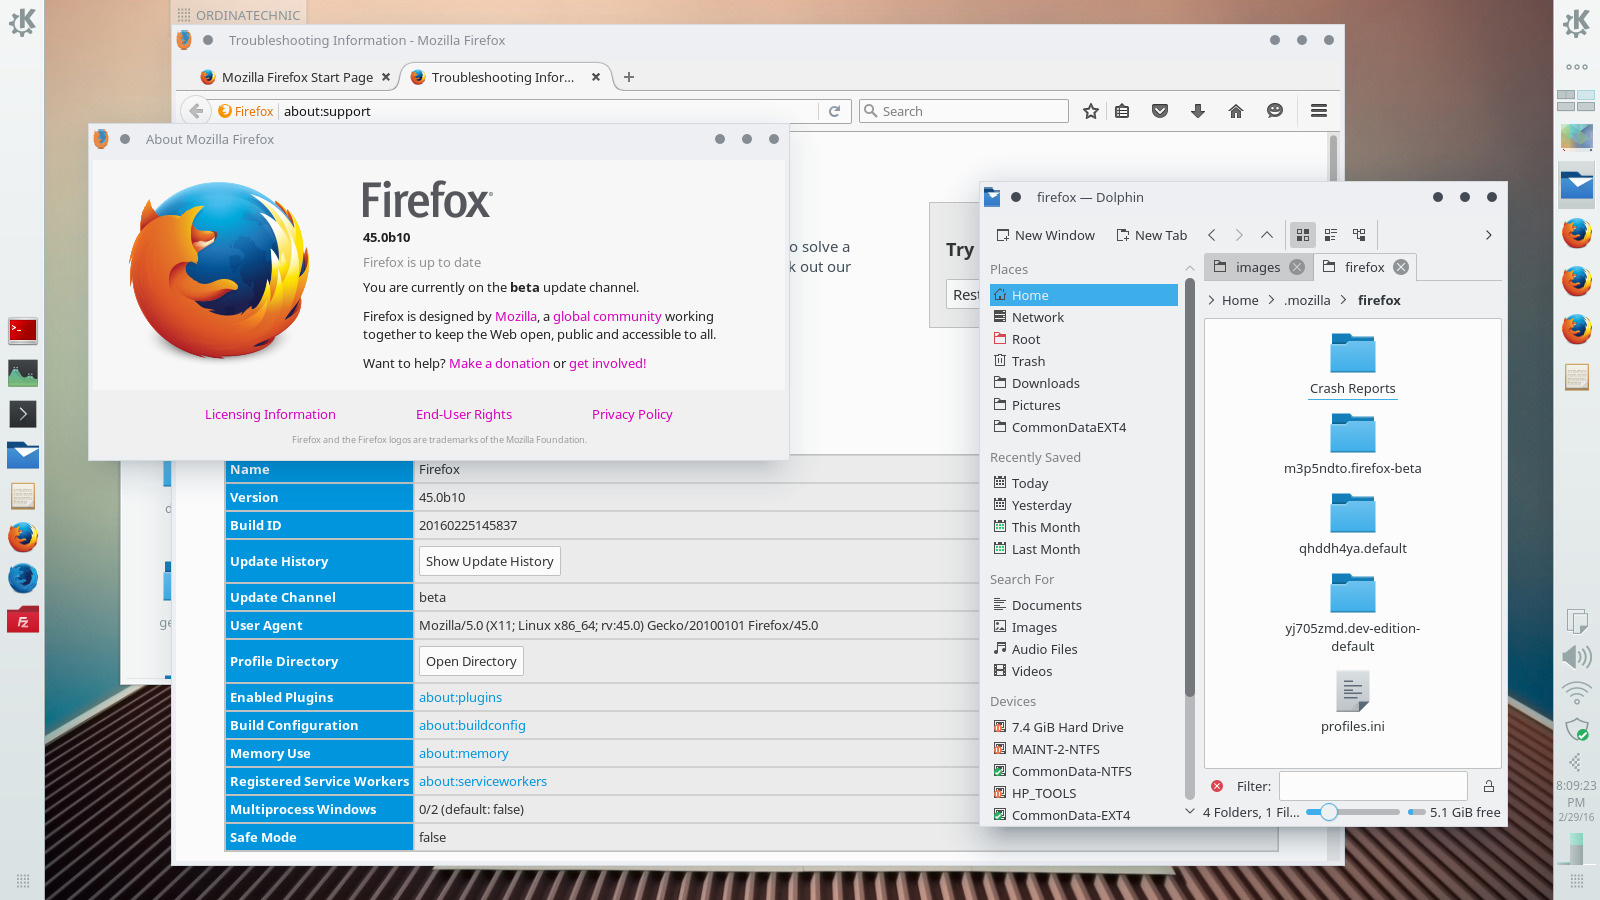 About Firefox Window and Troubleshooting Information